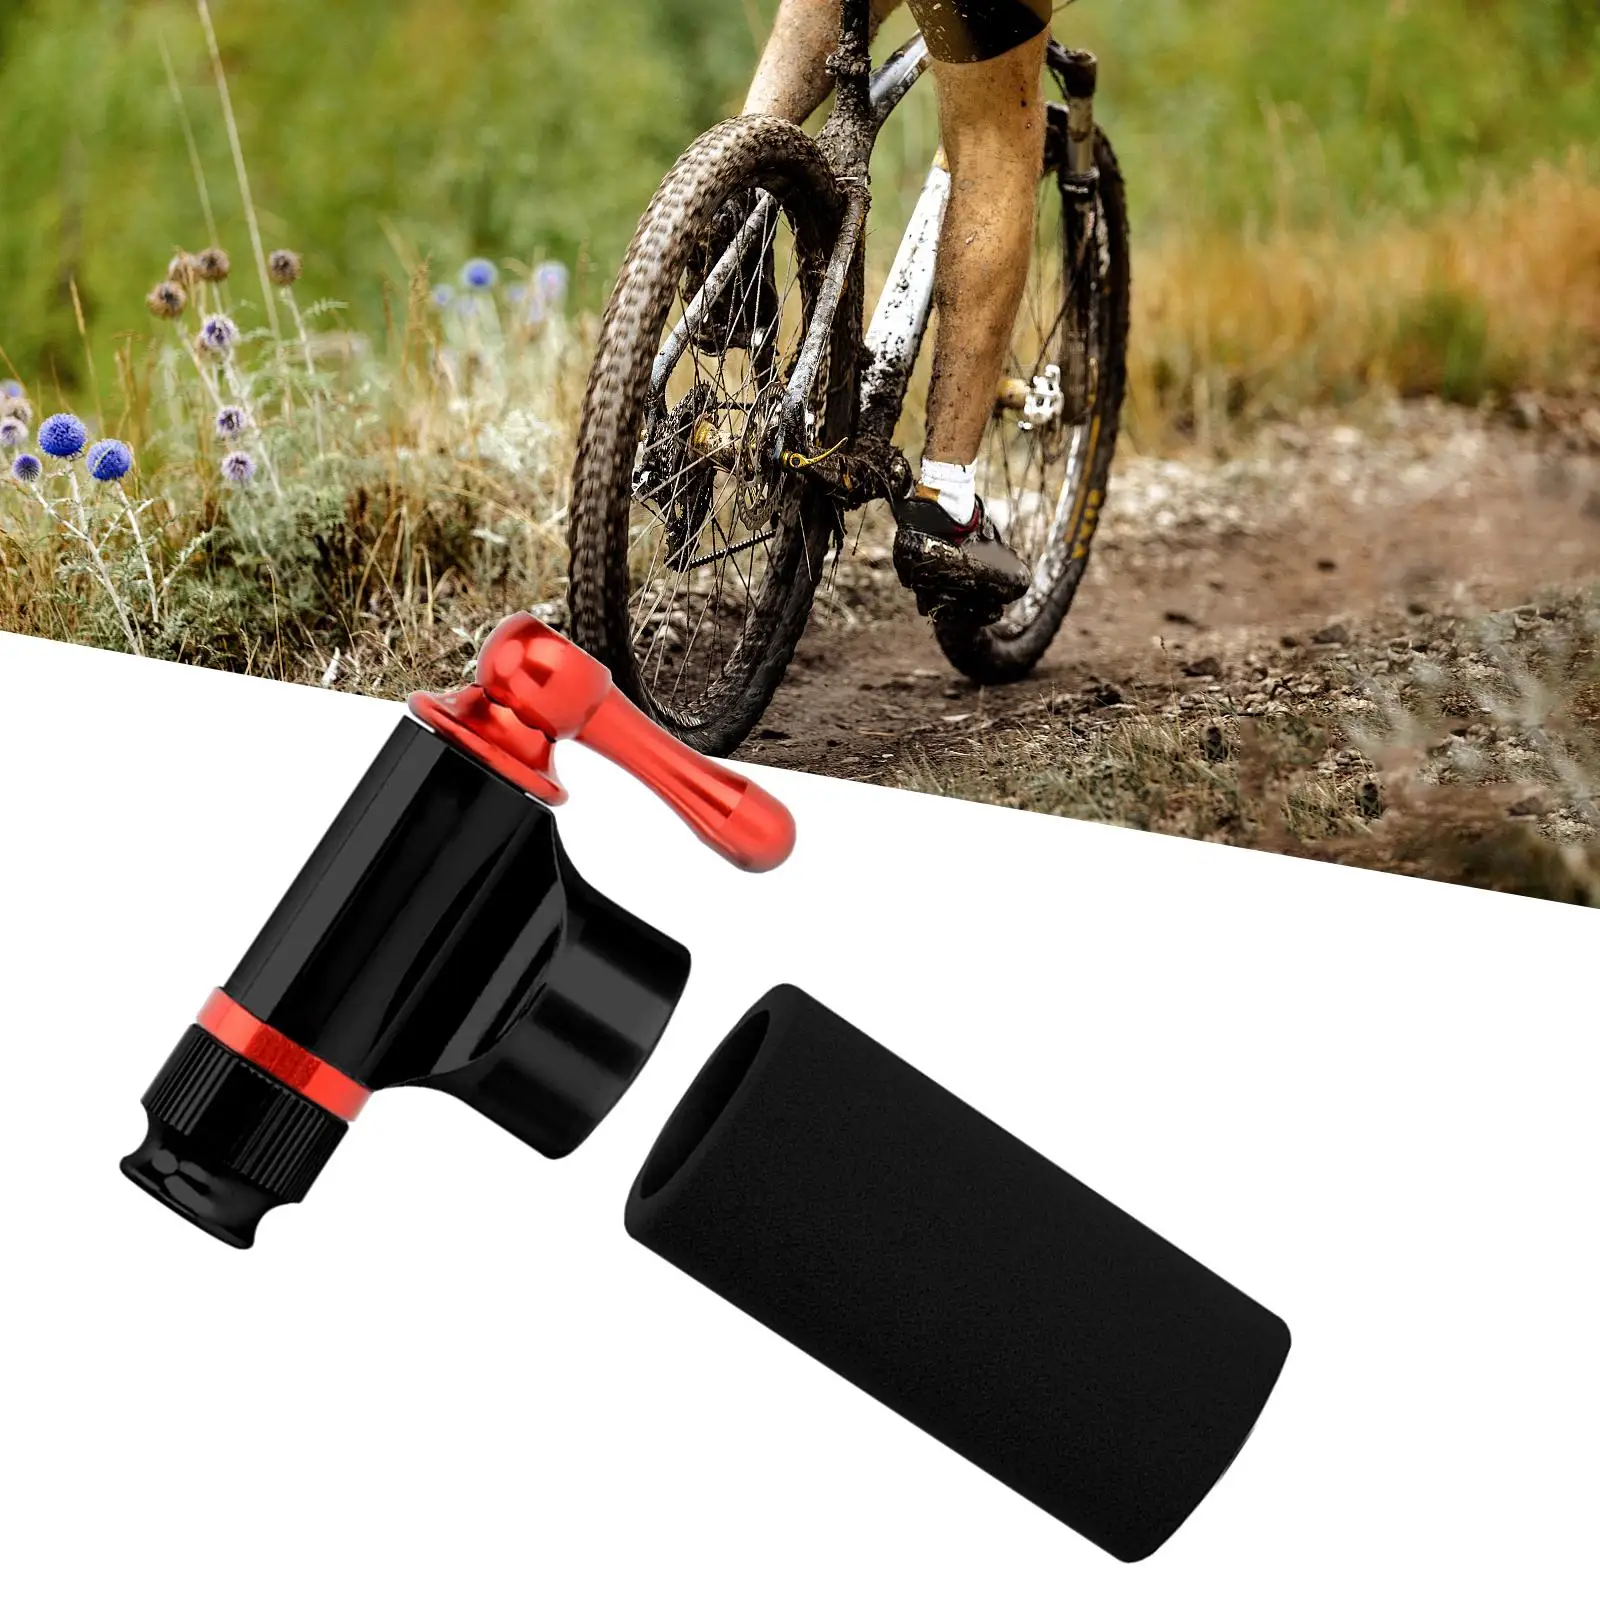 CO2 Bike Tire Inflator Portable Portable Compact Accs Inflator Connector for Sports Basketball Mountain Bike Traveling Camping